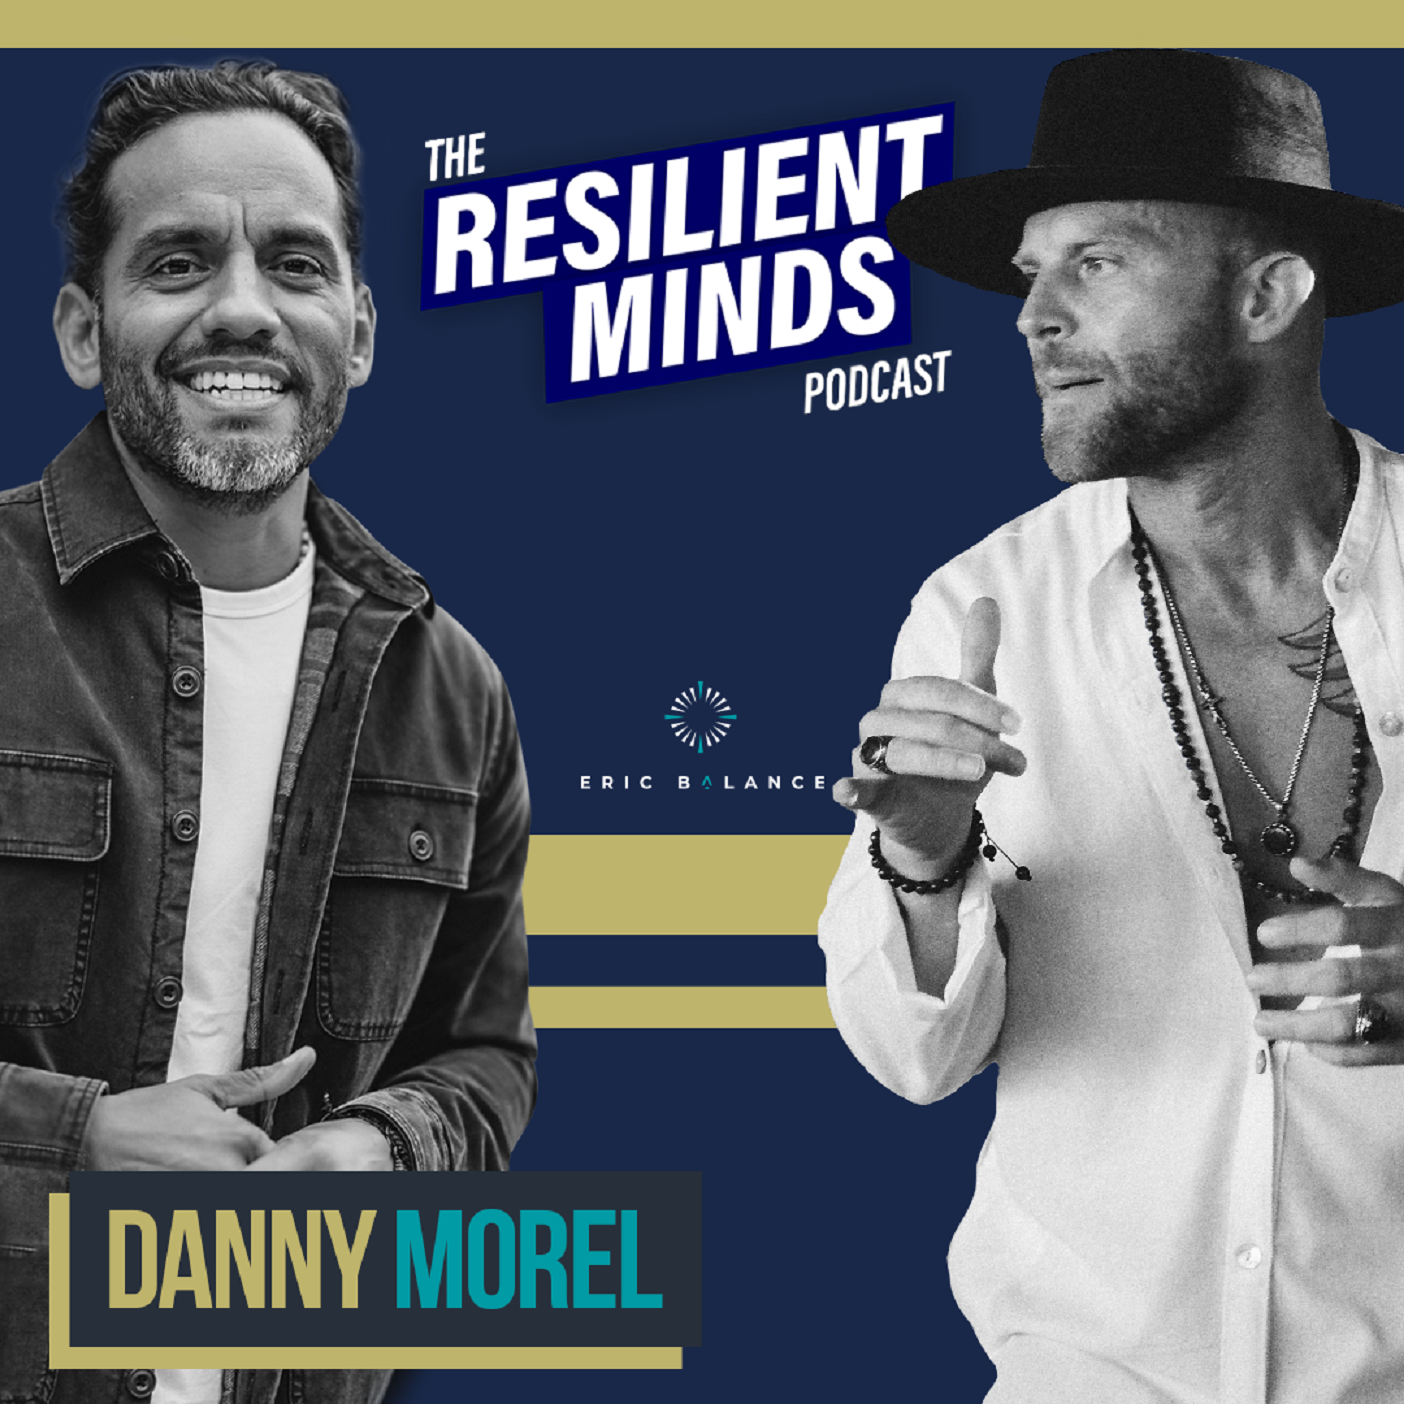 Episode 121 – The Resilient Minds Podcast with Danny Morel